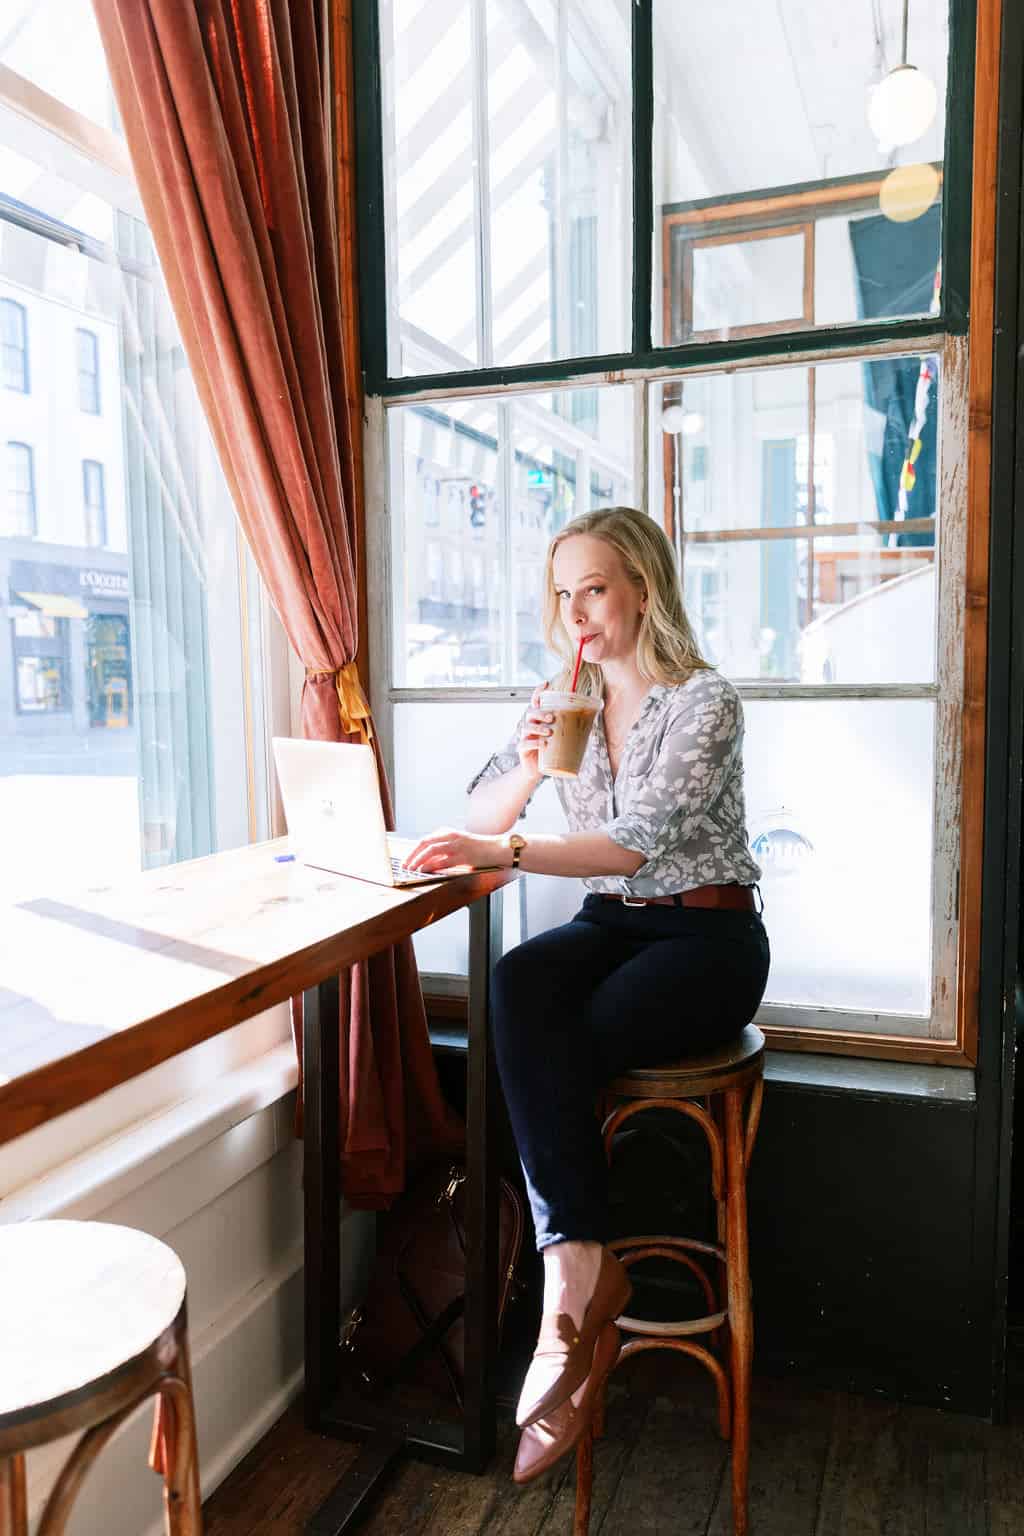 Digital Grace Design owner, Sarah Blodgett, sits on wooden stool in a cafe at her laptop drinking iced coffee